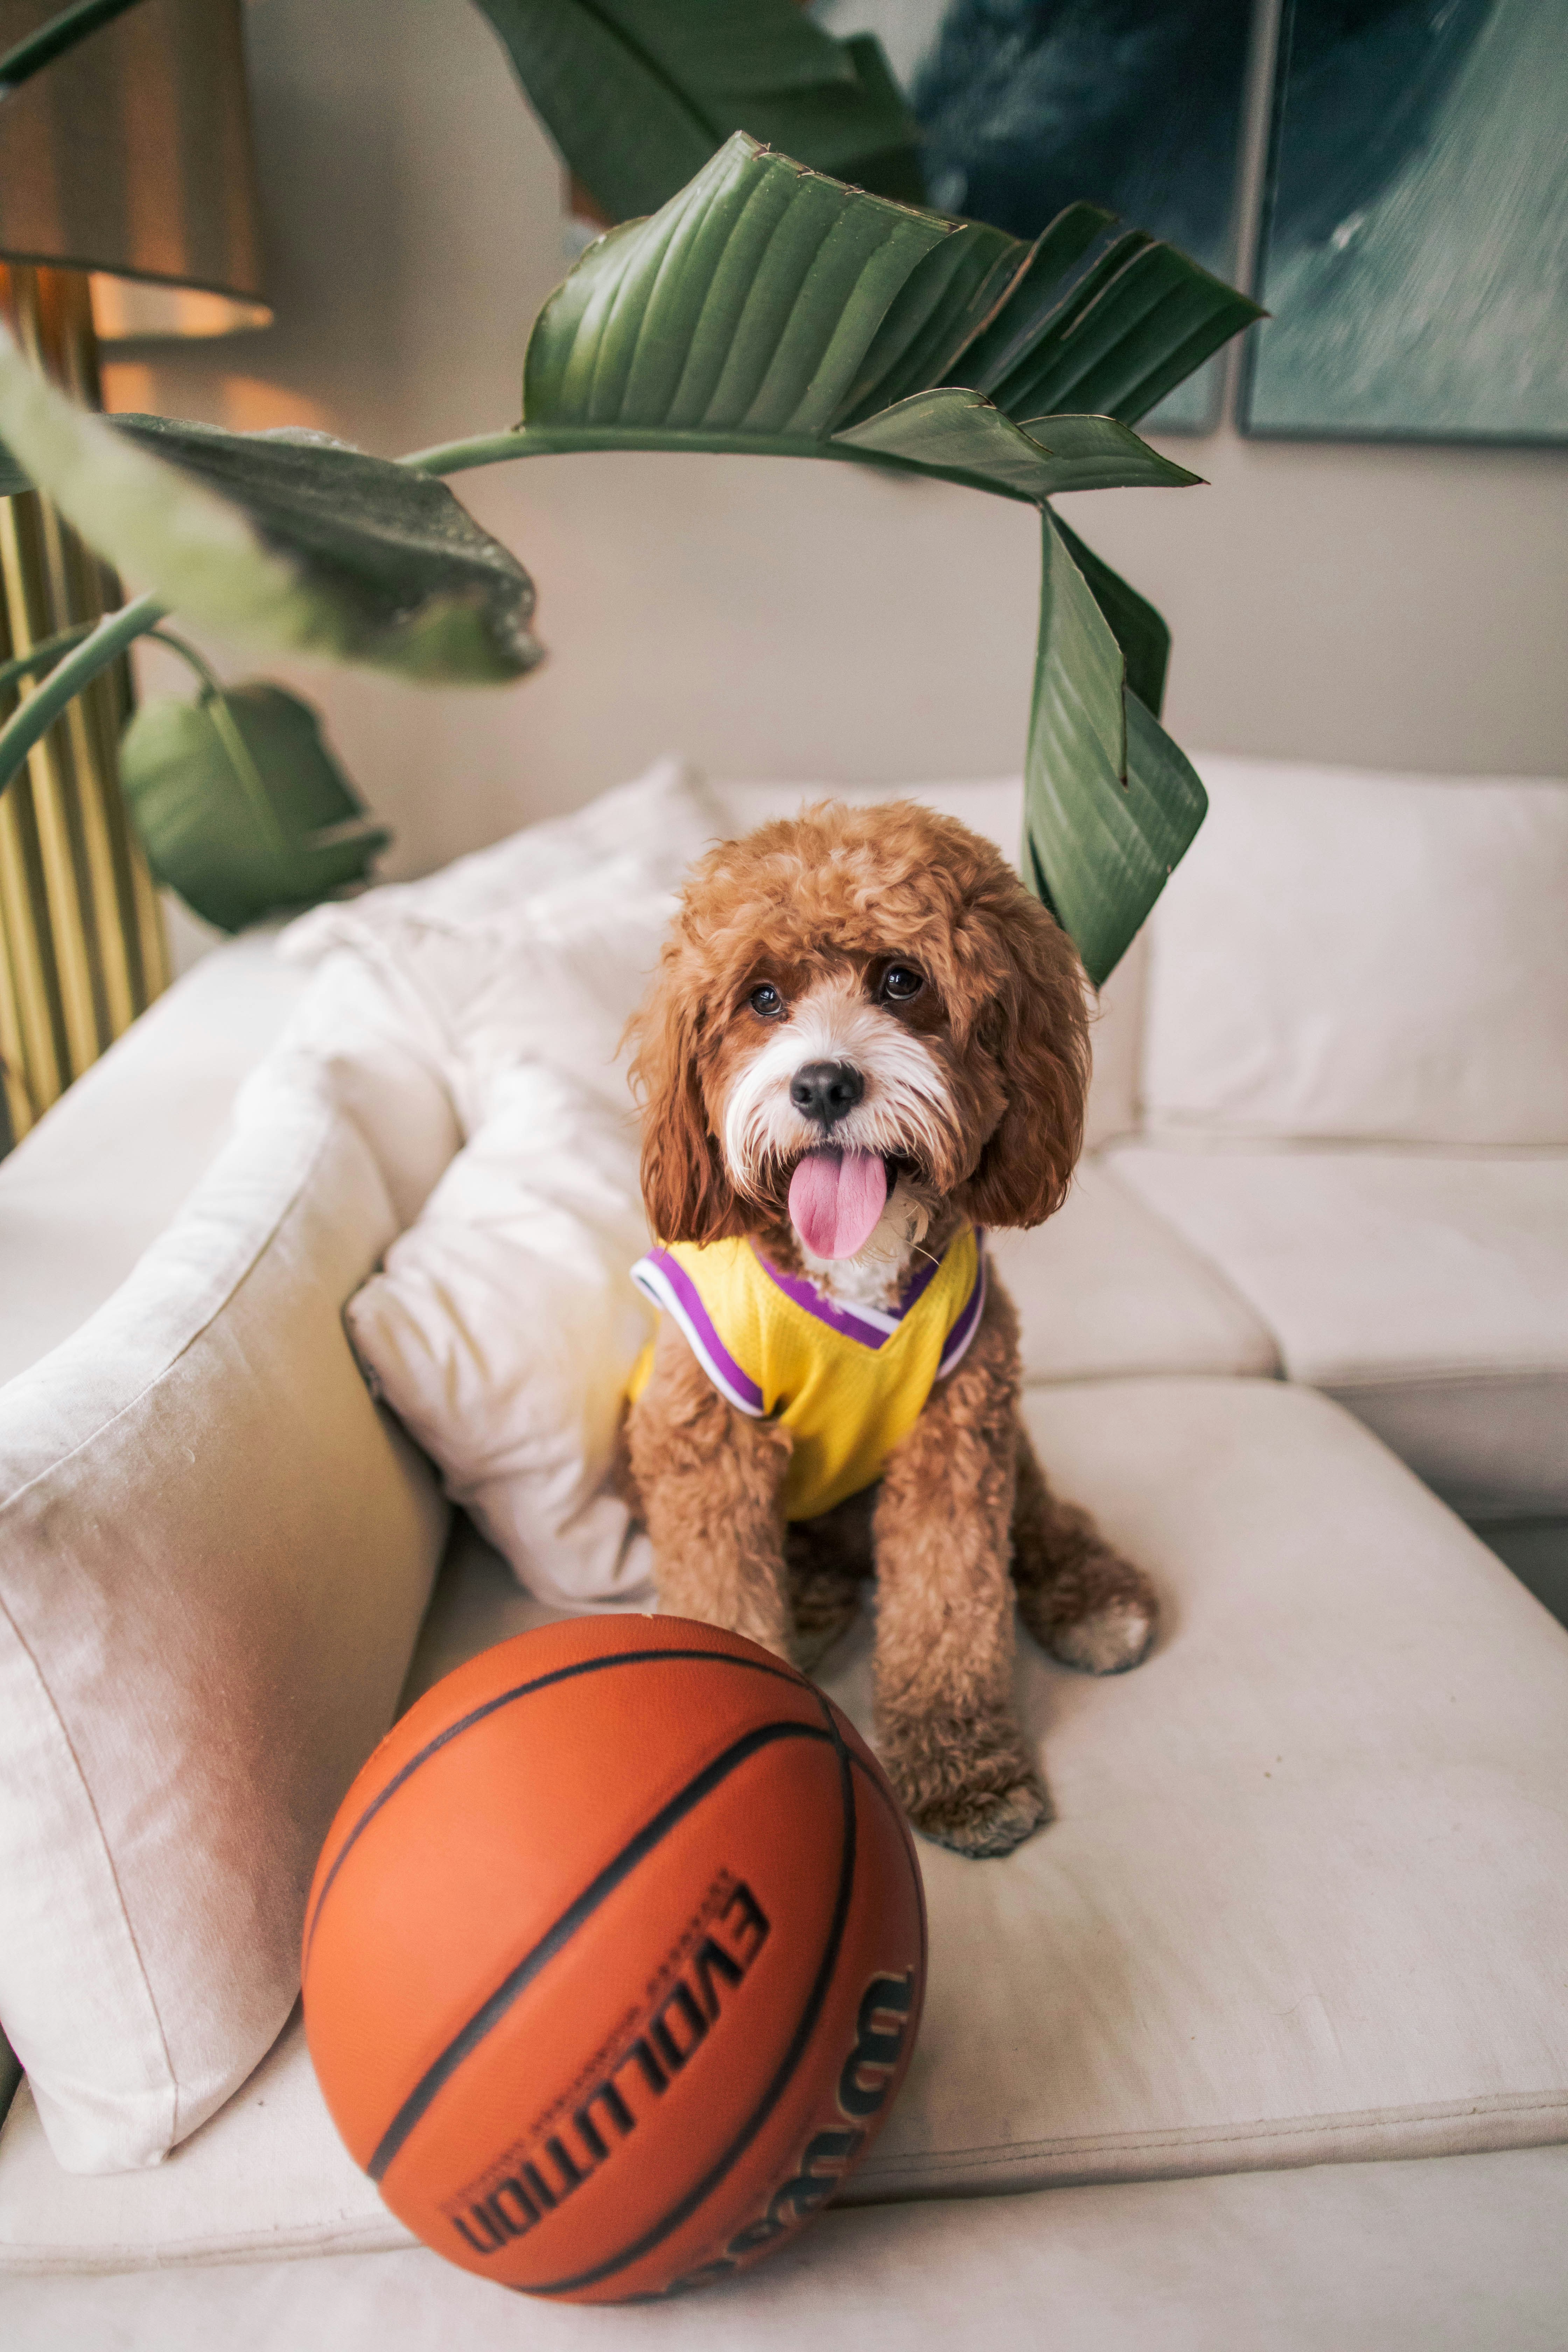 Odie (@odiethecavapoo) reppin' the Lakers! If you find my photos useful, please consider subscribing to me on YouTube for the occasional photography tutorial and much more - https://bit.ly/3smVlKp - I'd greatly appreciate it!